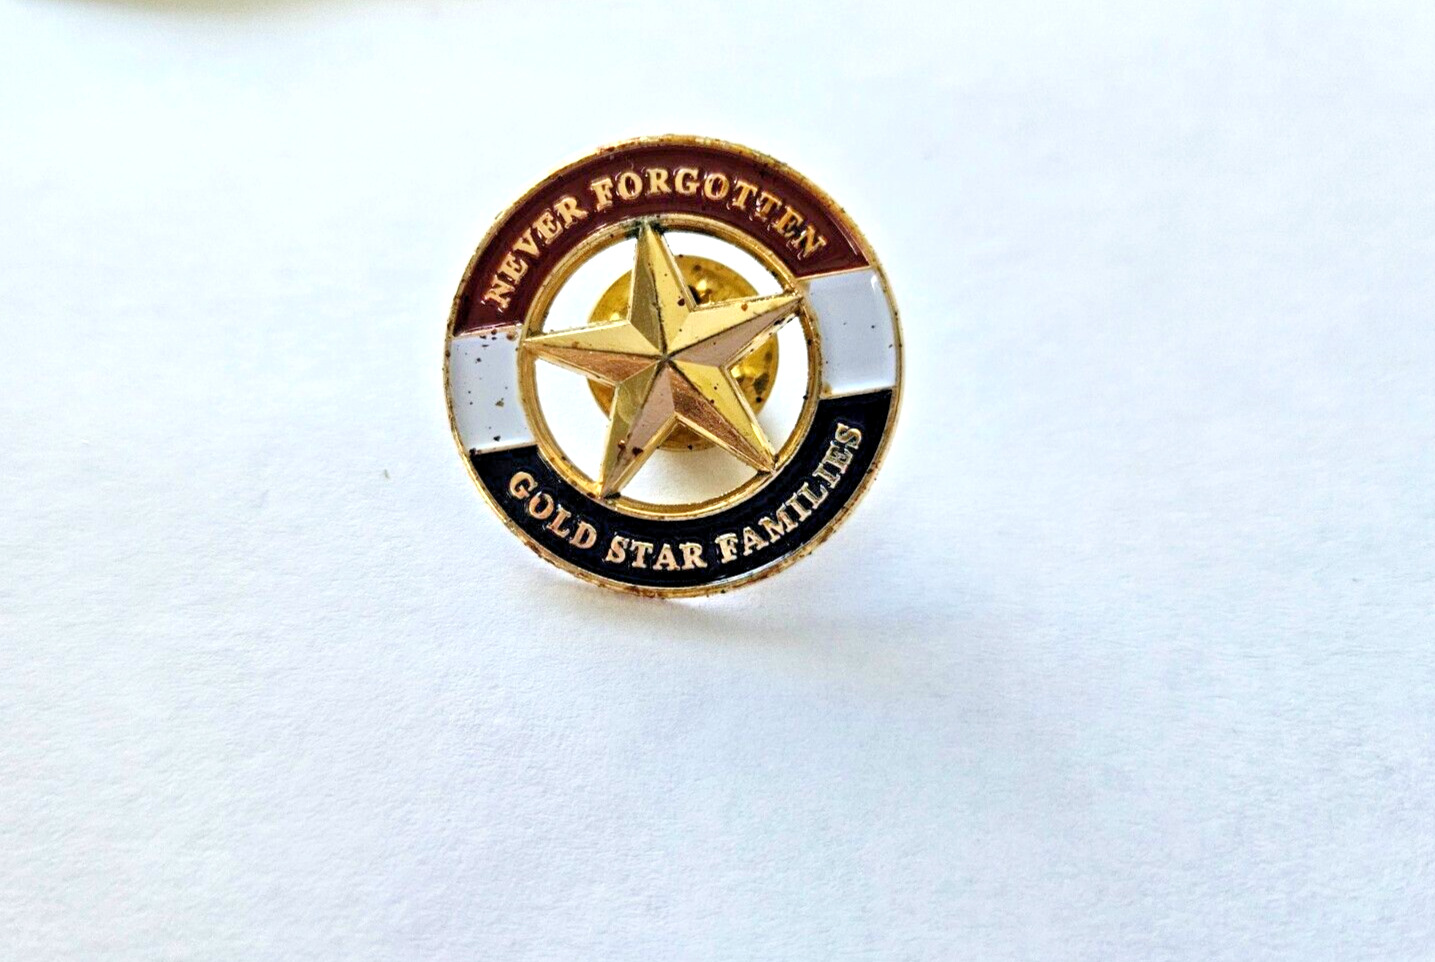 Gold Toned Enamel Golden Star Families Pin US Army